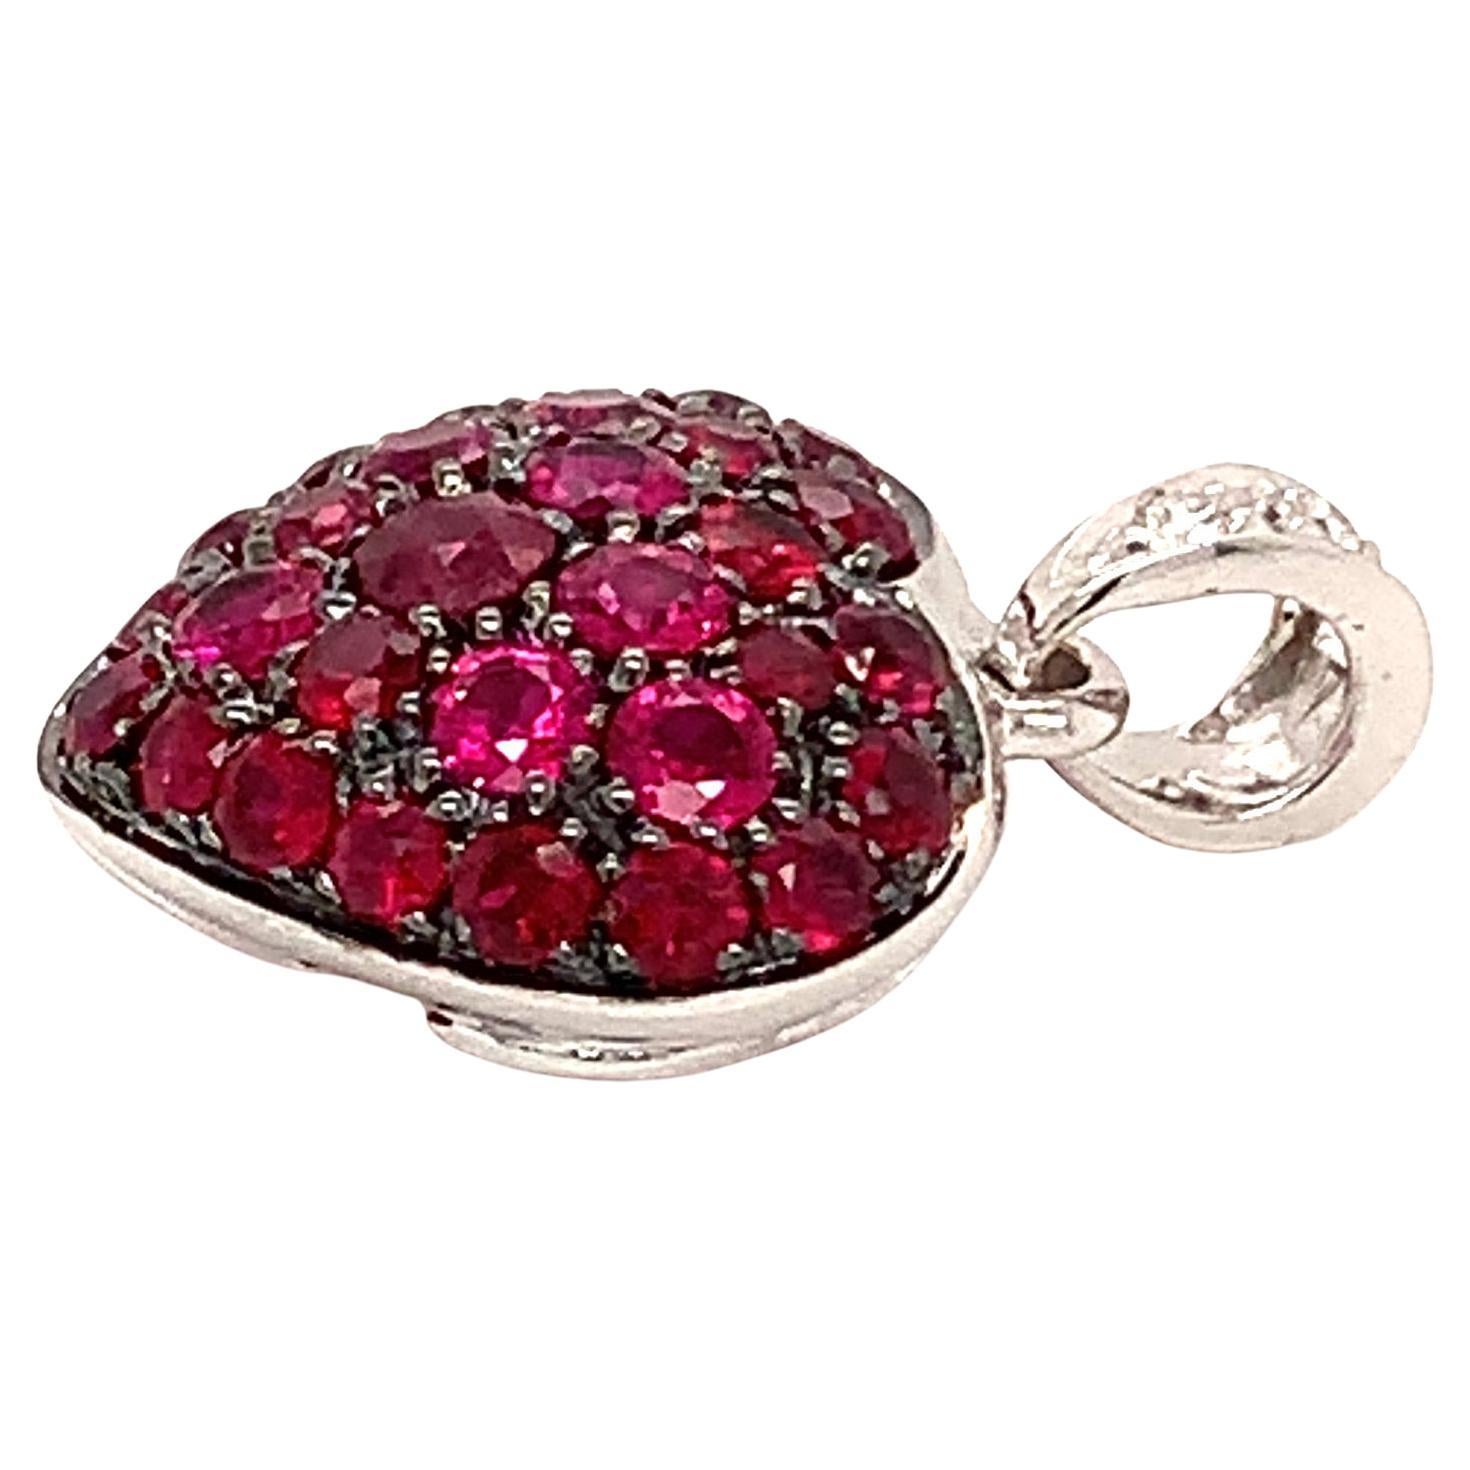 Garavelli  18 Karat White Gold Pavè Ruby Puffed Heart Pendant with White Diamonds Bale.
The Heart featurs a very nice pavè cushion of rubies of different sizes, degrading from a center large stone to the sides; it's black finished to create a strong